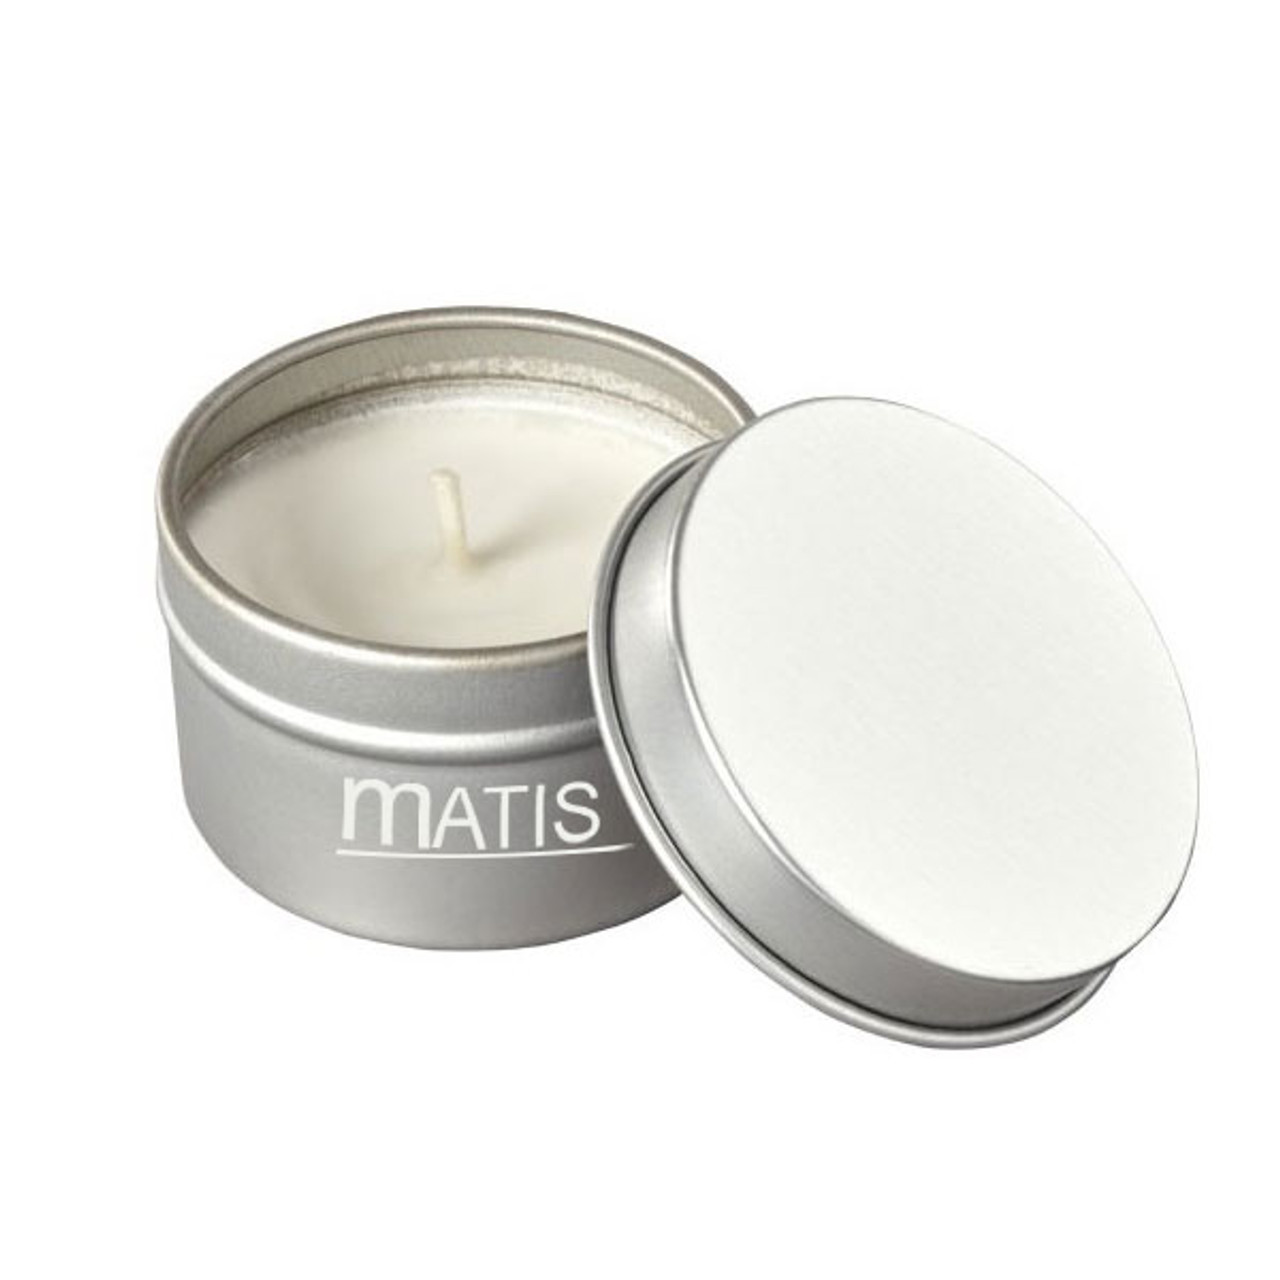 Matis Candle For Body Massage - Free with $35 Purchase